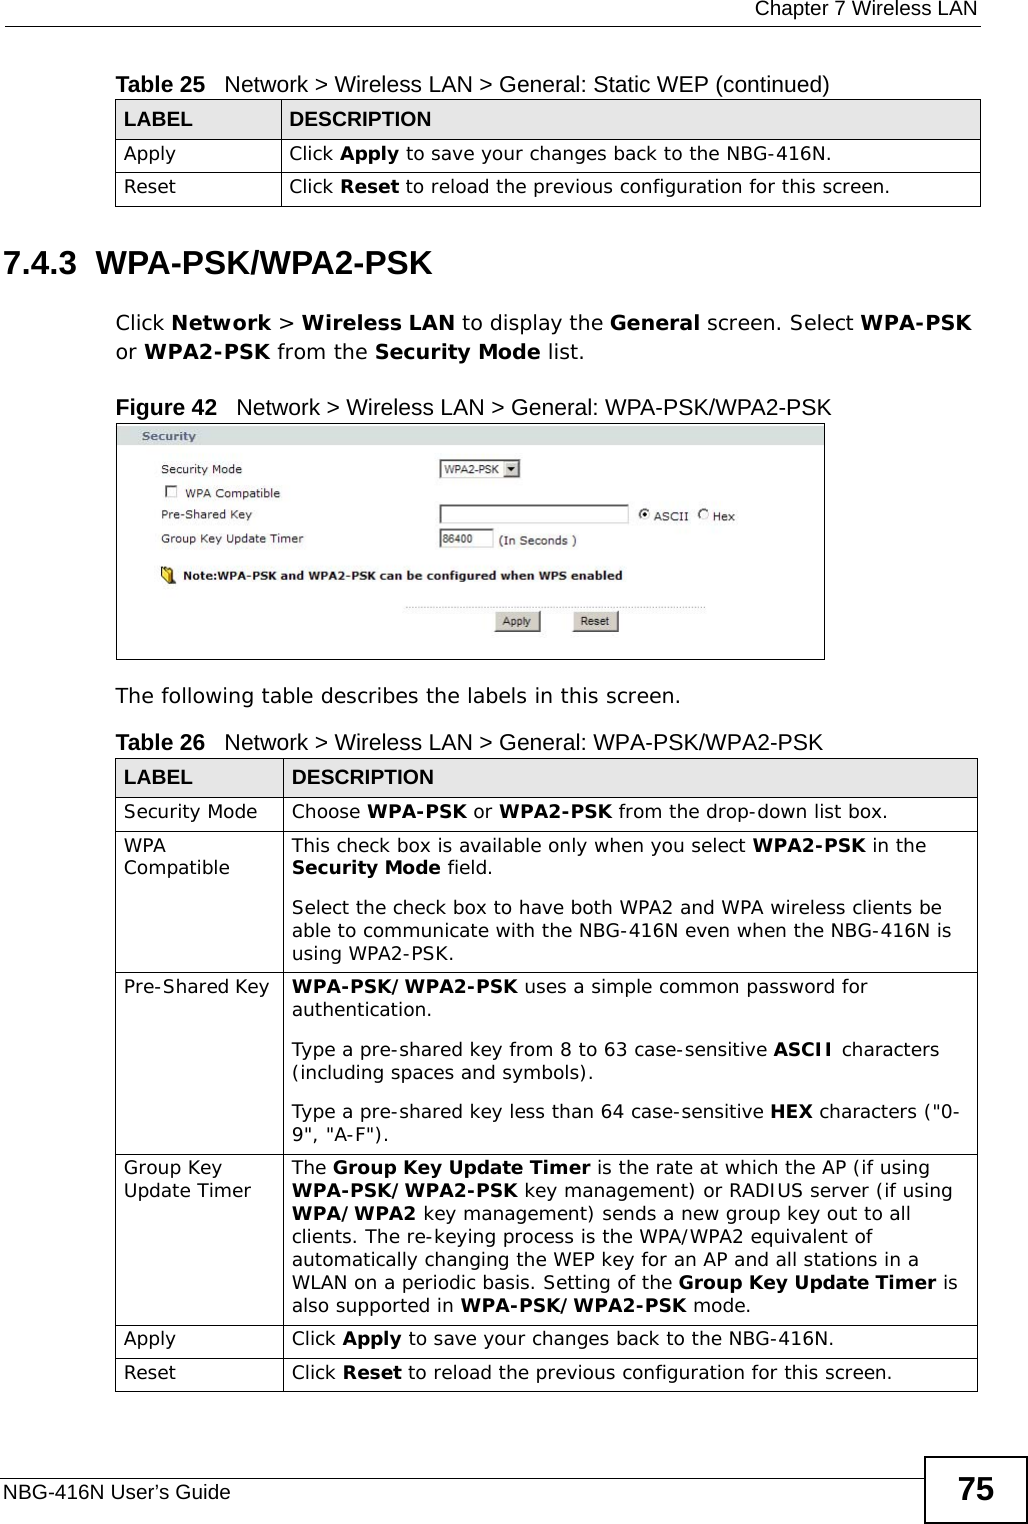  Chapter 7 Wireless LANNBG-416N User’s Guide 757.4.3  WPA-PSK/WPA2-PSKClick Network &gt; Wireless LAN to display the General screen. Select WPA-PSK or WPA2-PSK from the Security Mode list.Figure 42   Network &gt; Wireless LAN &gt; General: WPA-PSK/WPA2-PSKThe following table describes the labels in this screen.Apply Click Apply to save your changes back to the NBG-416N.Reset Click Reset to reload the previous configuration for this screen.Table 25   Network &gt; Wireless LAN &gt; General: Static WEP (continued)LABEL DESCRIPTIONTable 26   Network &gt; Wireless LAN &gt; General: WPA-PSK/WPA2-PSKLABEL DESCRIPTIONSecurity Mode Choose WPA-PSK or WPA2-PSK from the drop-down list box.WPA Compatible This check box is available only when you select WPA2-PSK in the Security Mode field.Select the check box to have both WPA2 and WPA wireless clients be able to communicate with the NBG-416N even when the NBG-416N is using WPA2-PSK.Pre-Shared Key  WPA-PSK/WPA2-PSK uses a simple common password for authentication.Type a pre-shared key from 8 to 63 case-sensitive ASCII characters (including spaces and symbols).Type a pre-shared key less than 64 case-sensitive HEX characters (&quot;0-9&quot;, &quot;A-F&quot;).Group Key Update Timer The Group Key Update Timer is the rate at which the AP (if using WPA-PSK/WPA2-PSK key management) or RADIUS server (if using WPA/WPA2 key management) sends a new group key out to all clients. The re-keying process is the WPA/WPA2 equivalent of automatically changing the WEP key for an AP and all stations in a WLAN on a periodic basis. Setting of the Group Key Update Timer is also supported in WPA-PSK/WPA2-PSK mode. Apply Click Apply to save your changes back to the NBG-416N.Reset Click Reset to reload the previous configuration for this screen.